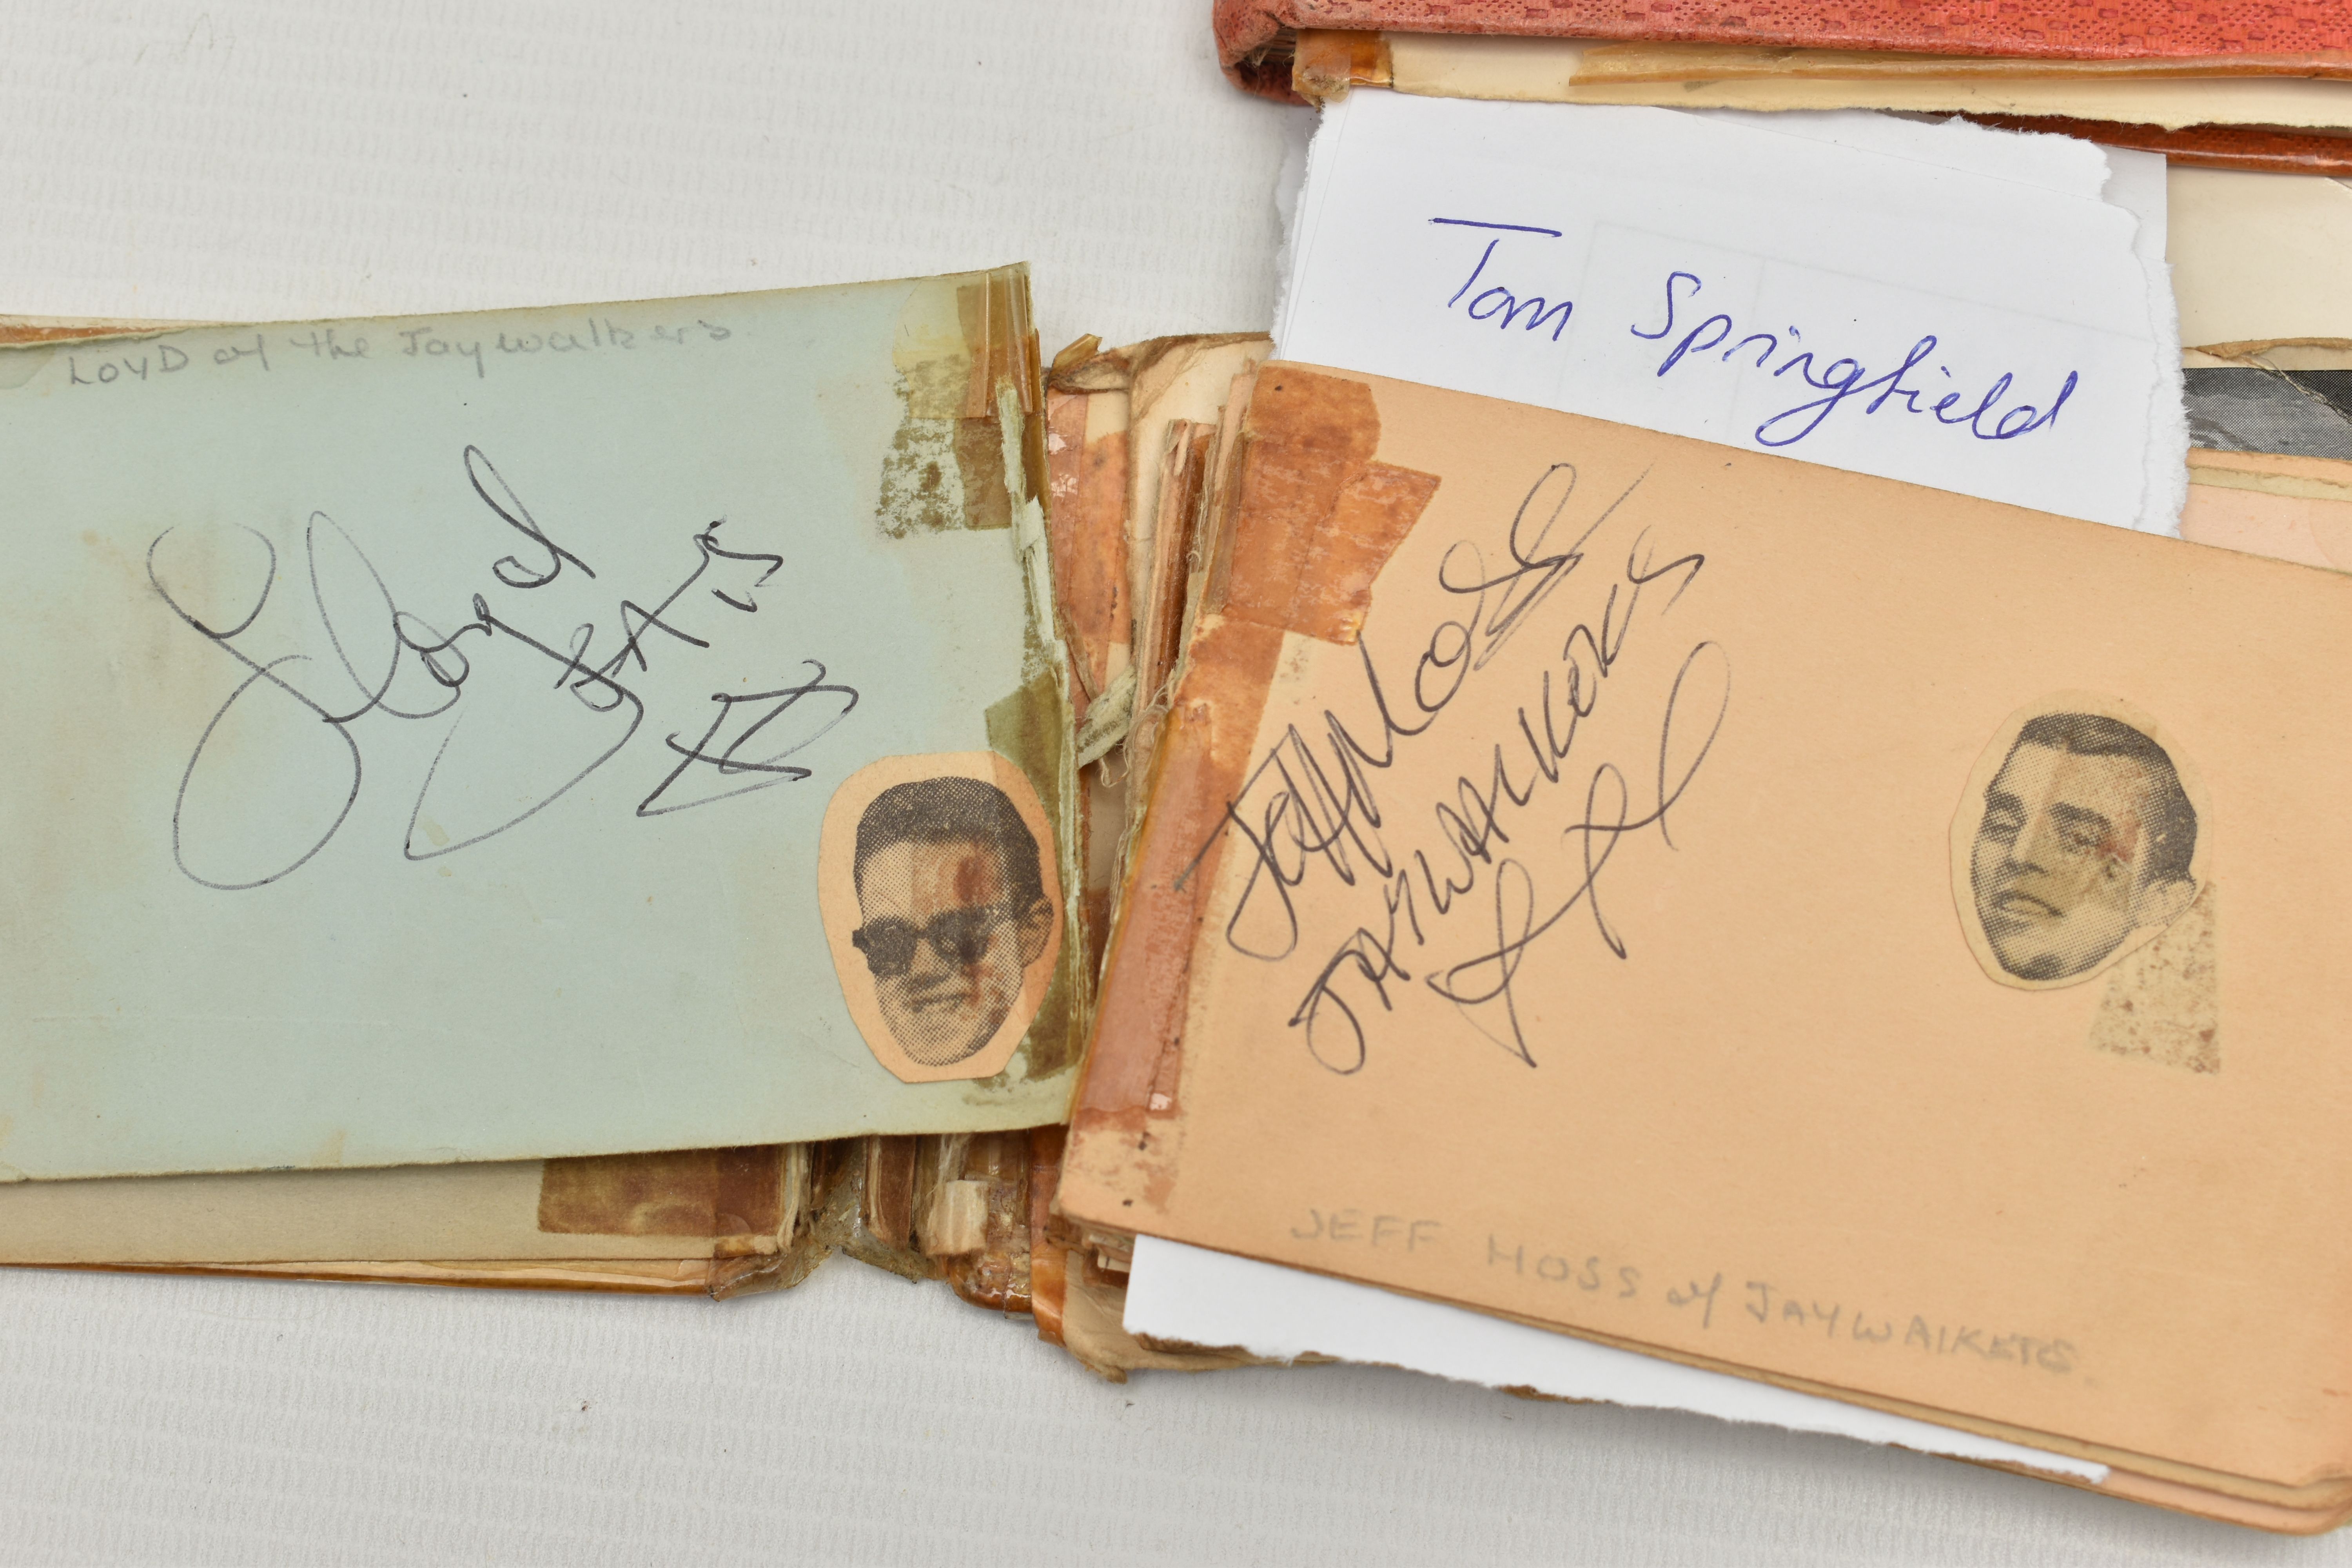 THE BEATLES AUTOGRAPHS, two autograph albums and two photographs, the Woburn Abbey autograph book is - Image 9 of 22